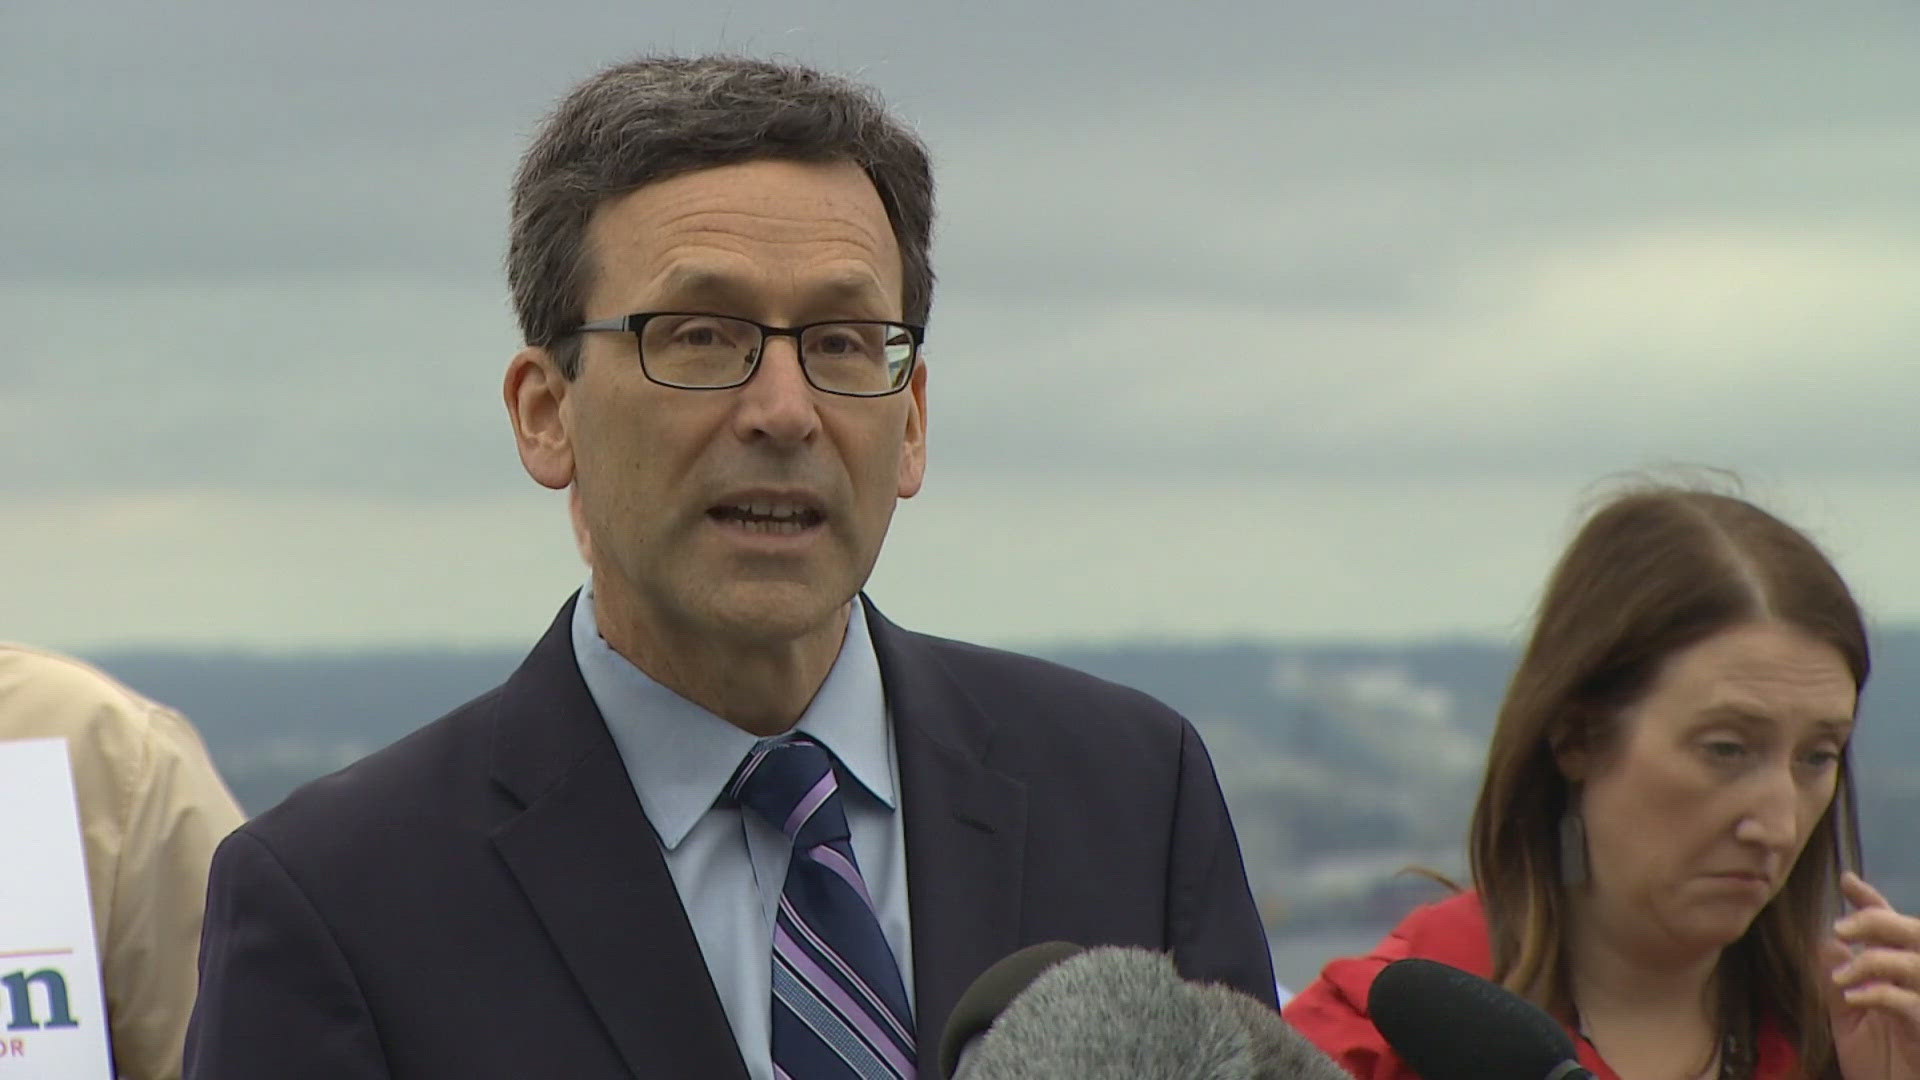 In addition to current Washington Attorney General Bob Ferguson, two other men with the same name filed for the race Friday afternoon.